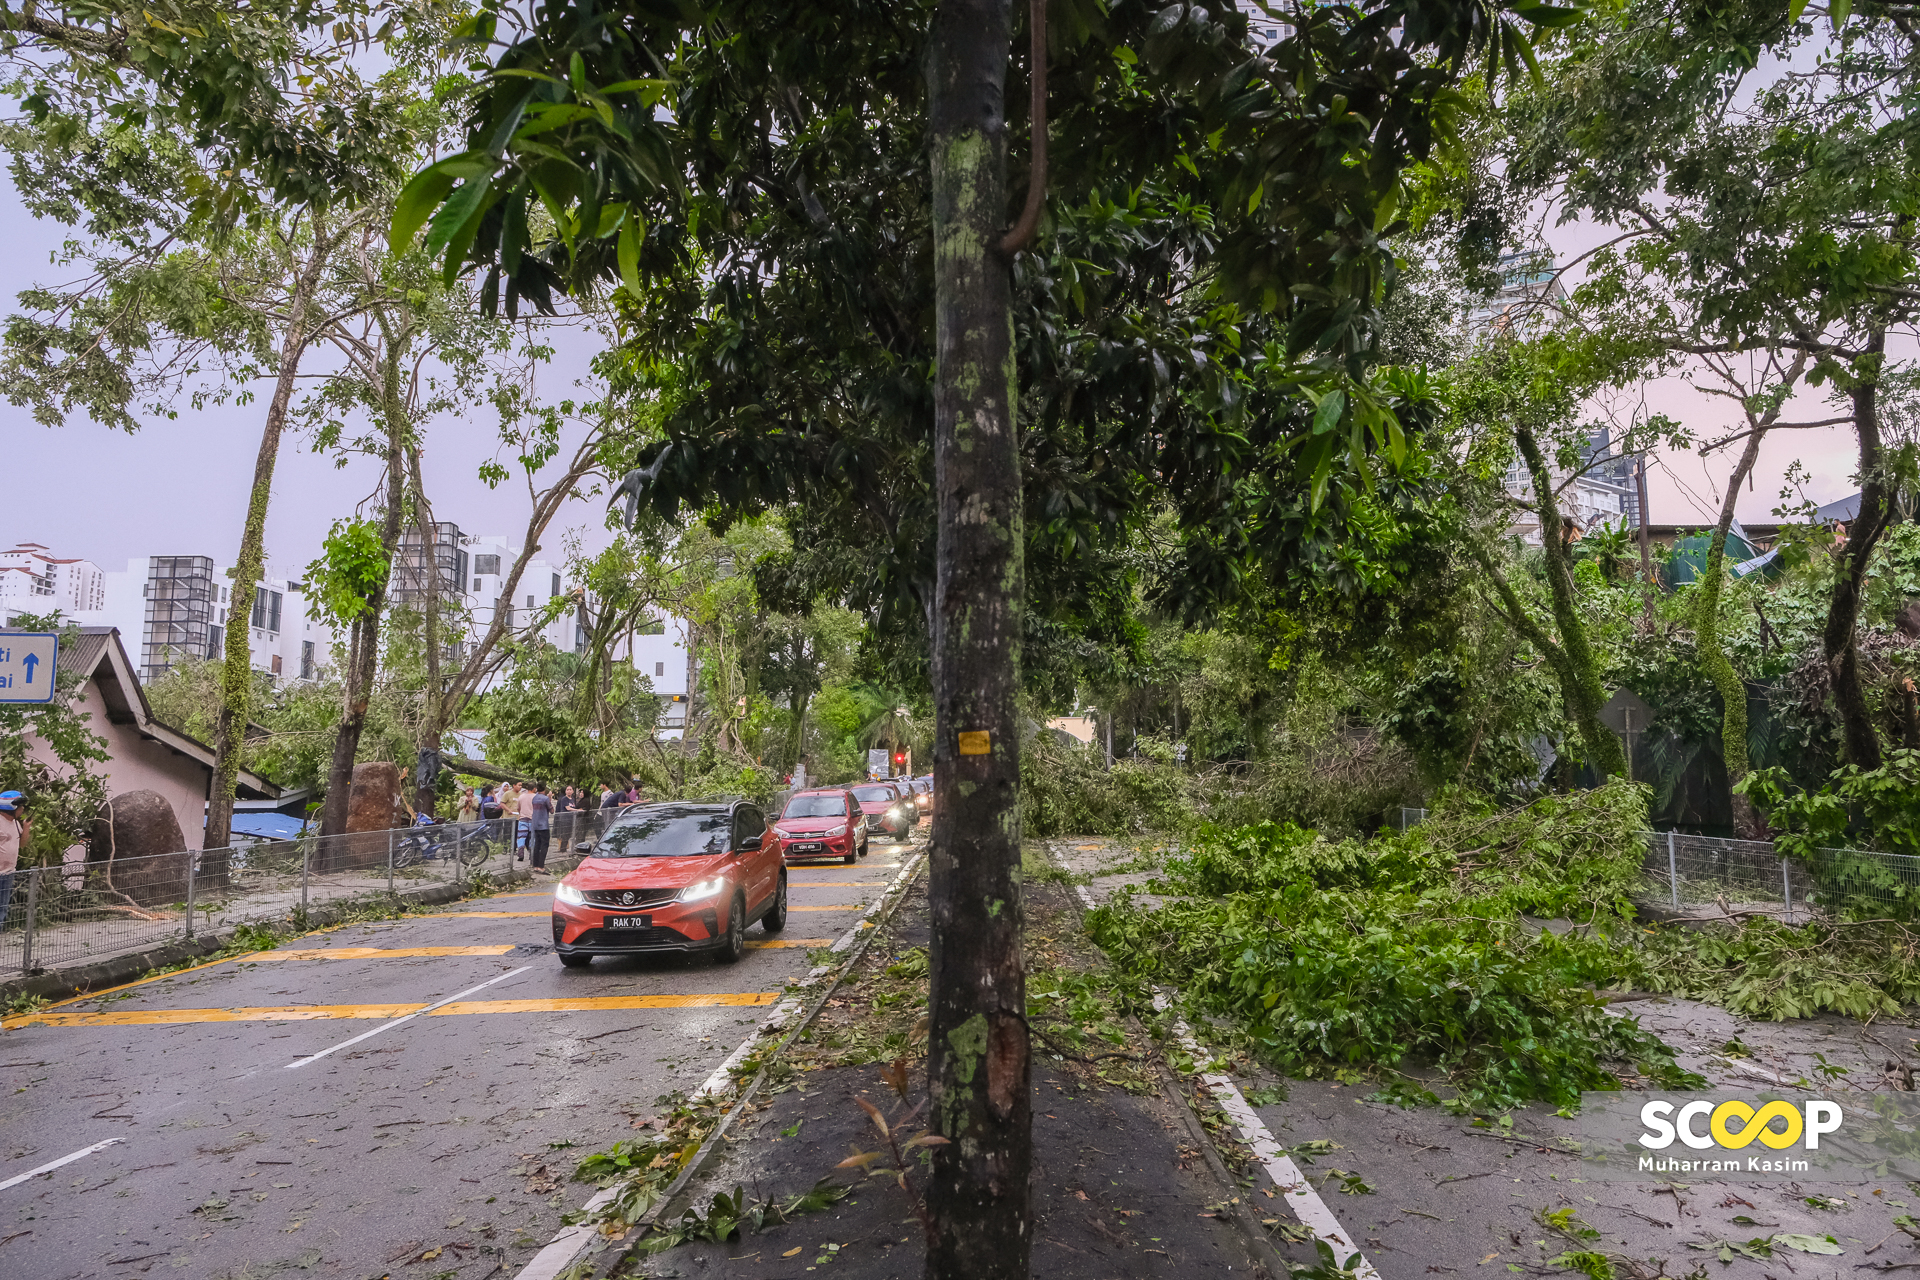 DBKL to deploy four contractors in each parliamentary area for tree maintenance